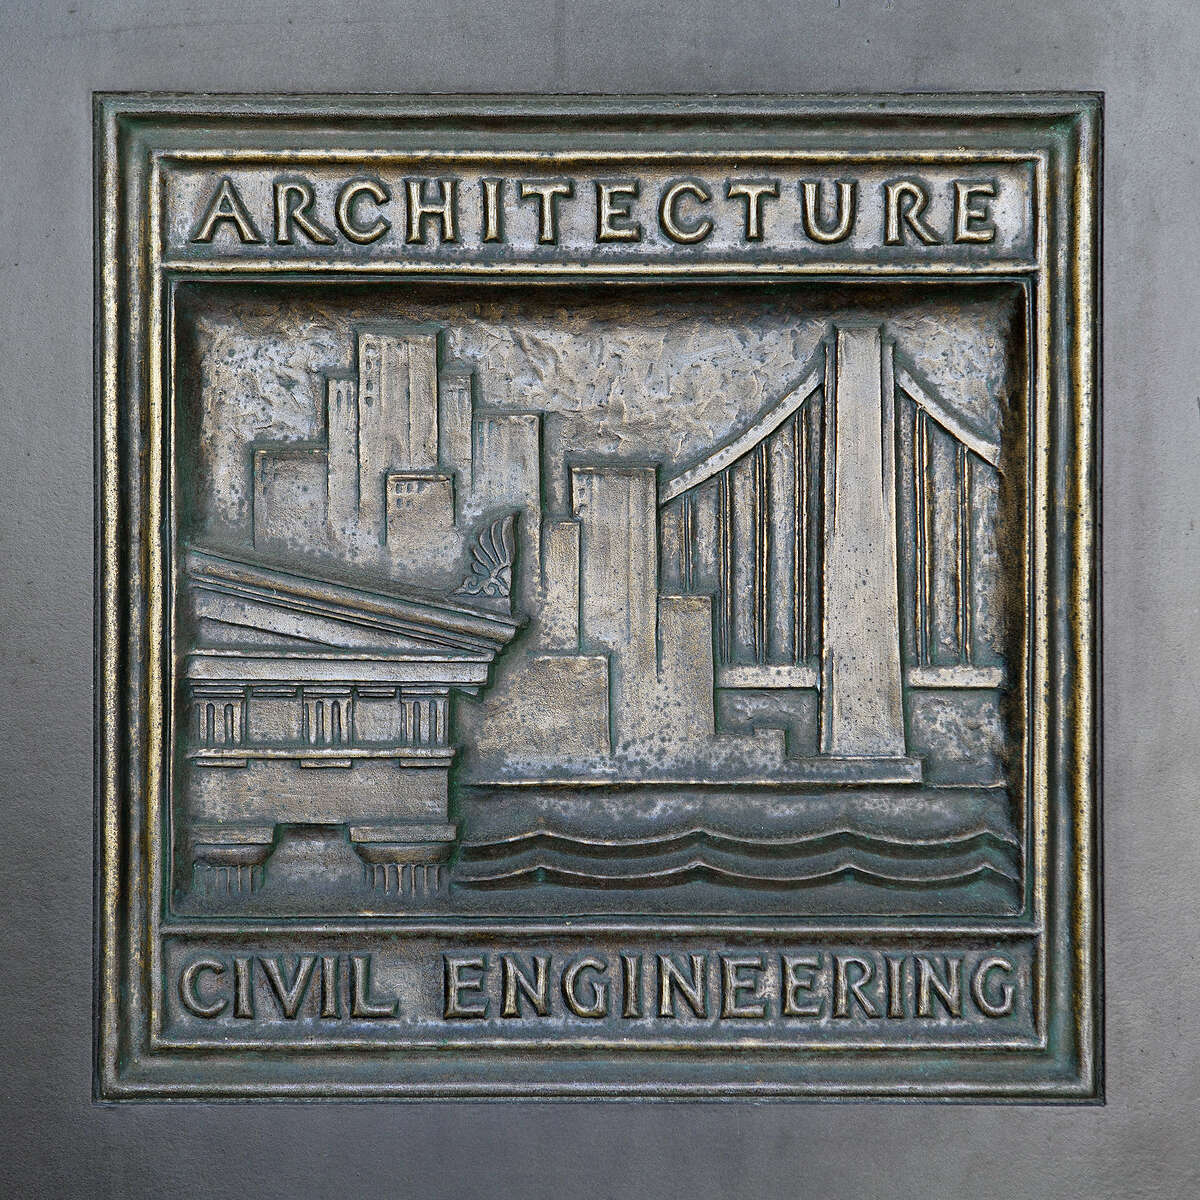 This bronze architecture plaque by sculptor Leonard Crunelle is one of many he created to adorn the doors of the Museum of Science and Industry in Chicago.